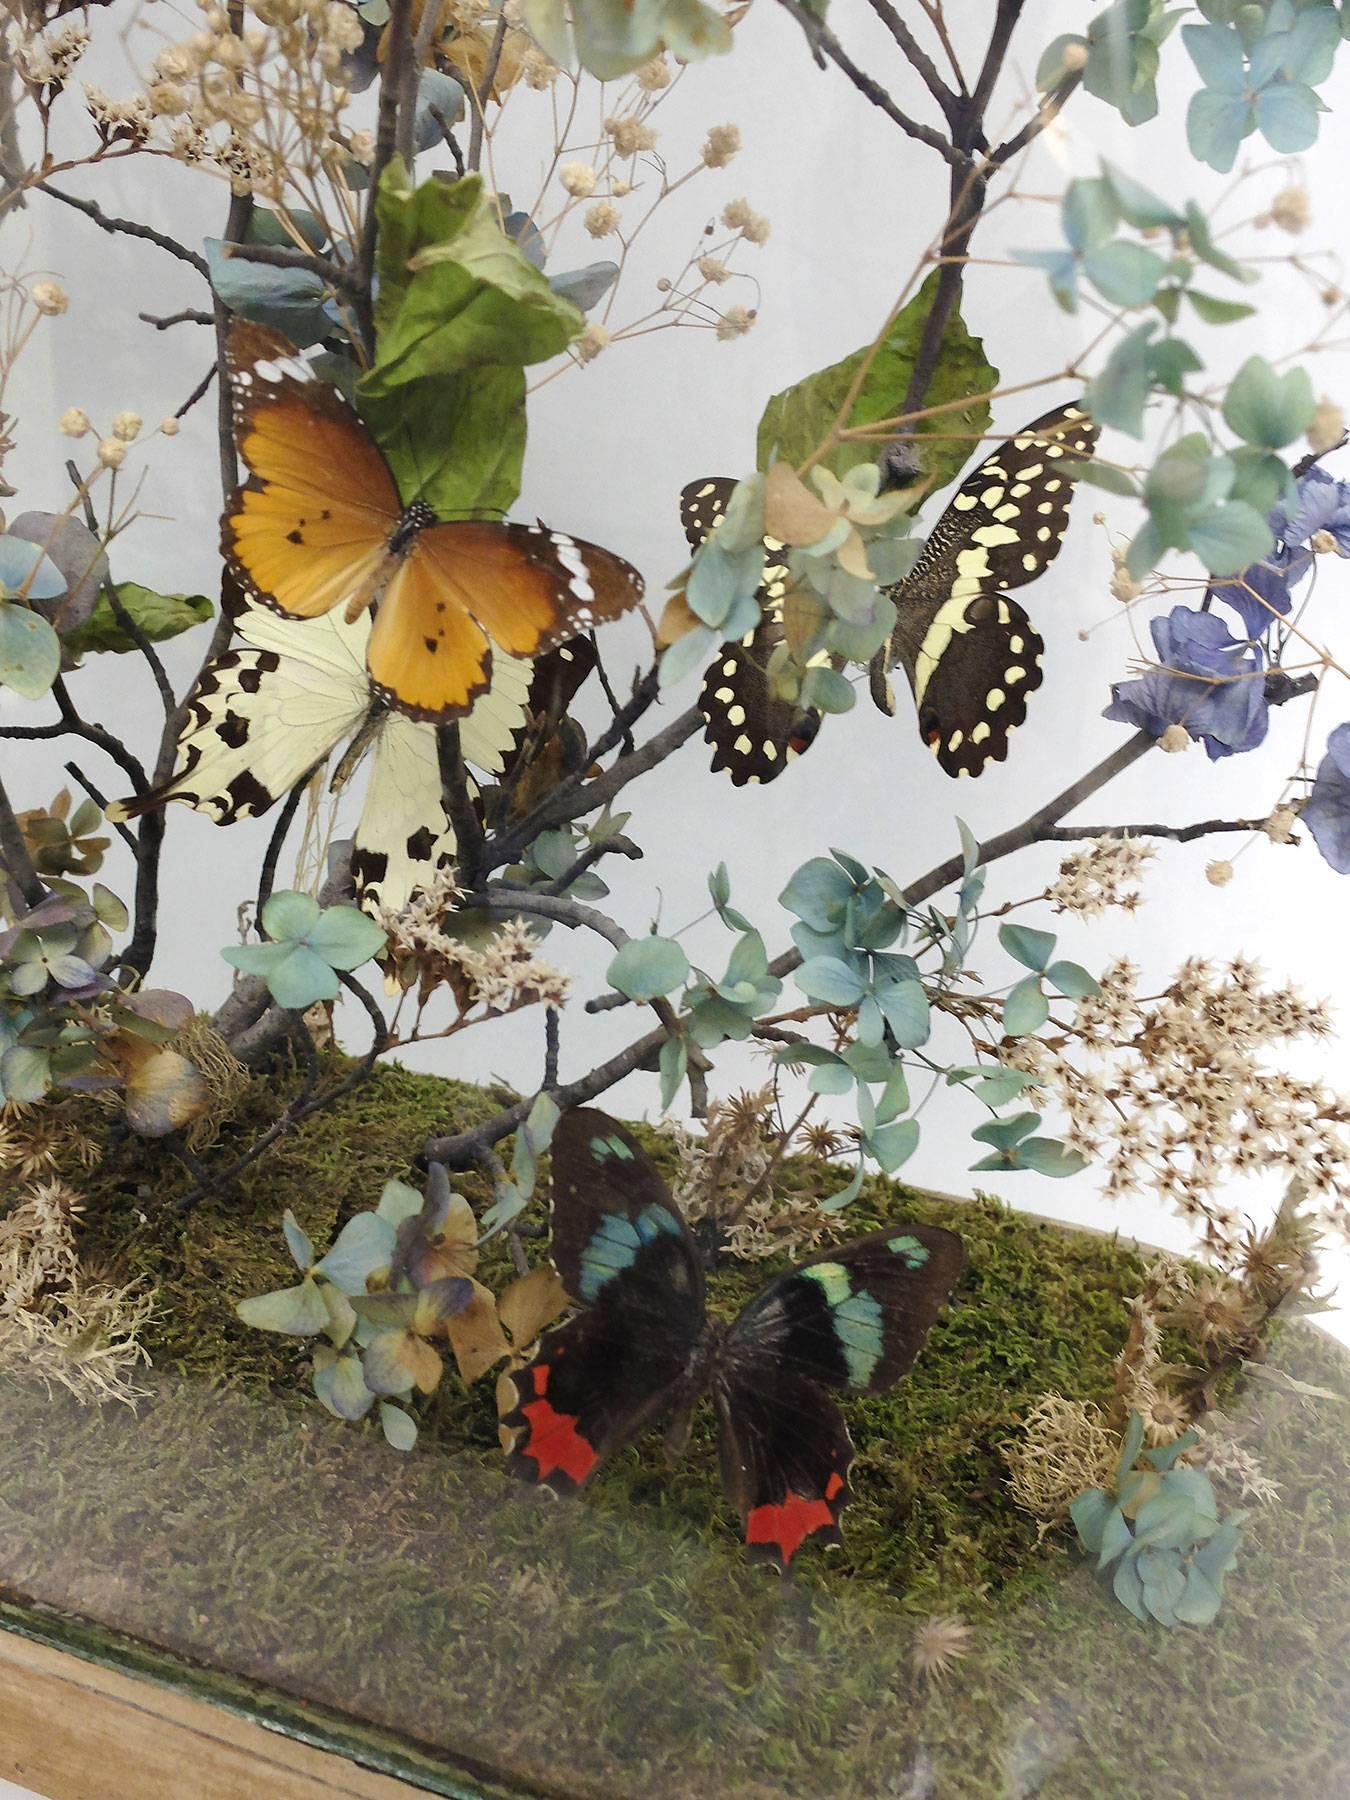 Italian Splendid and Unique Wunderkammer Diorama with Butterflies and Flowers